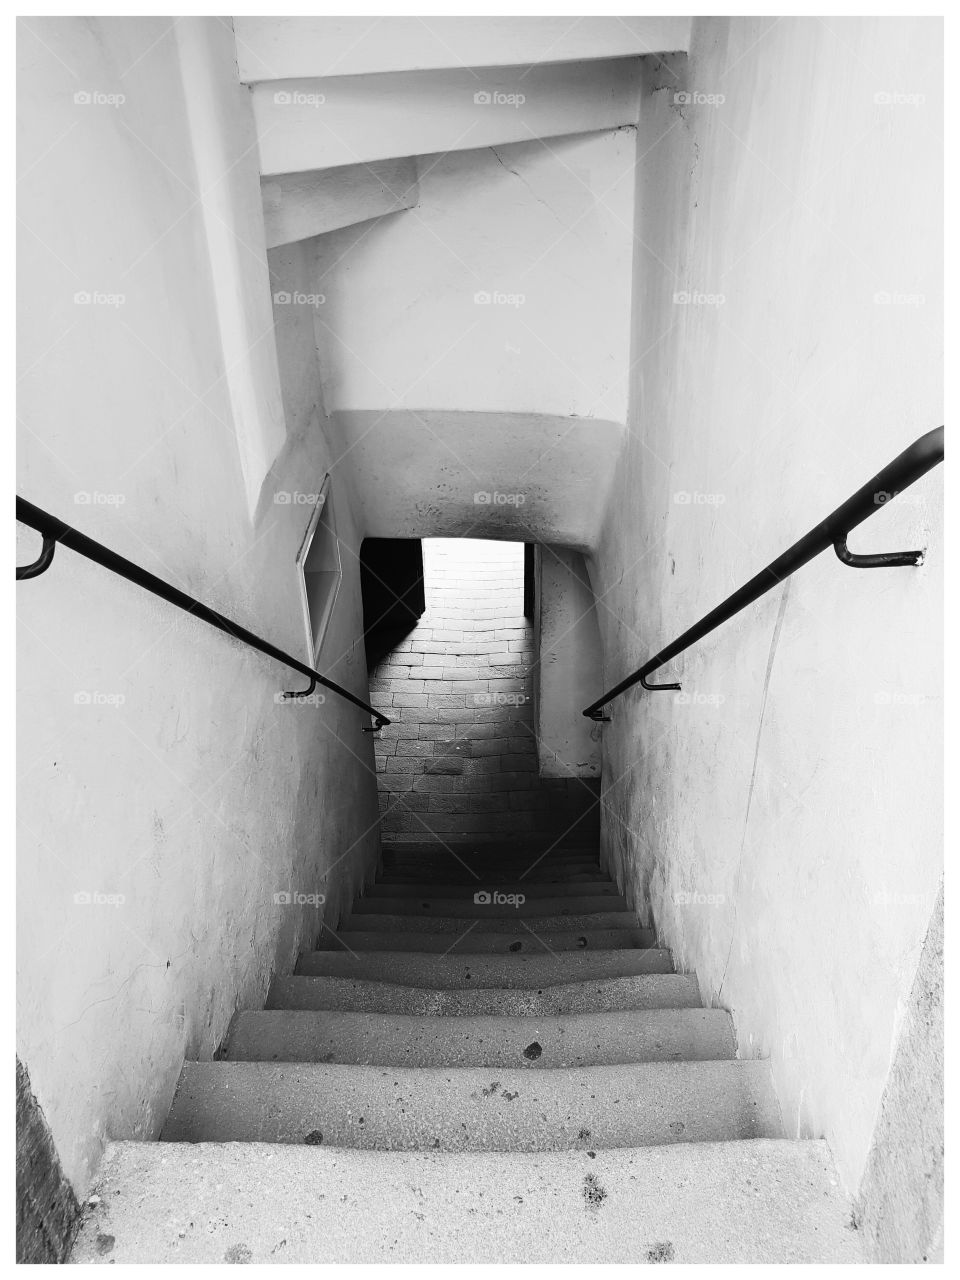 Love these little secret stairs leading to.....wherever! Somehow always like them better in black and white.